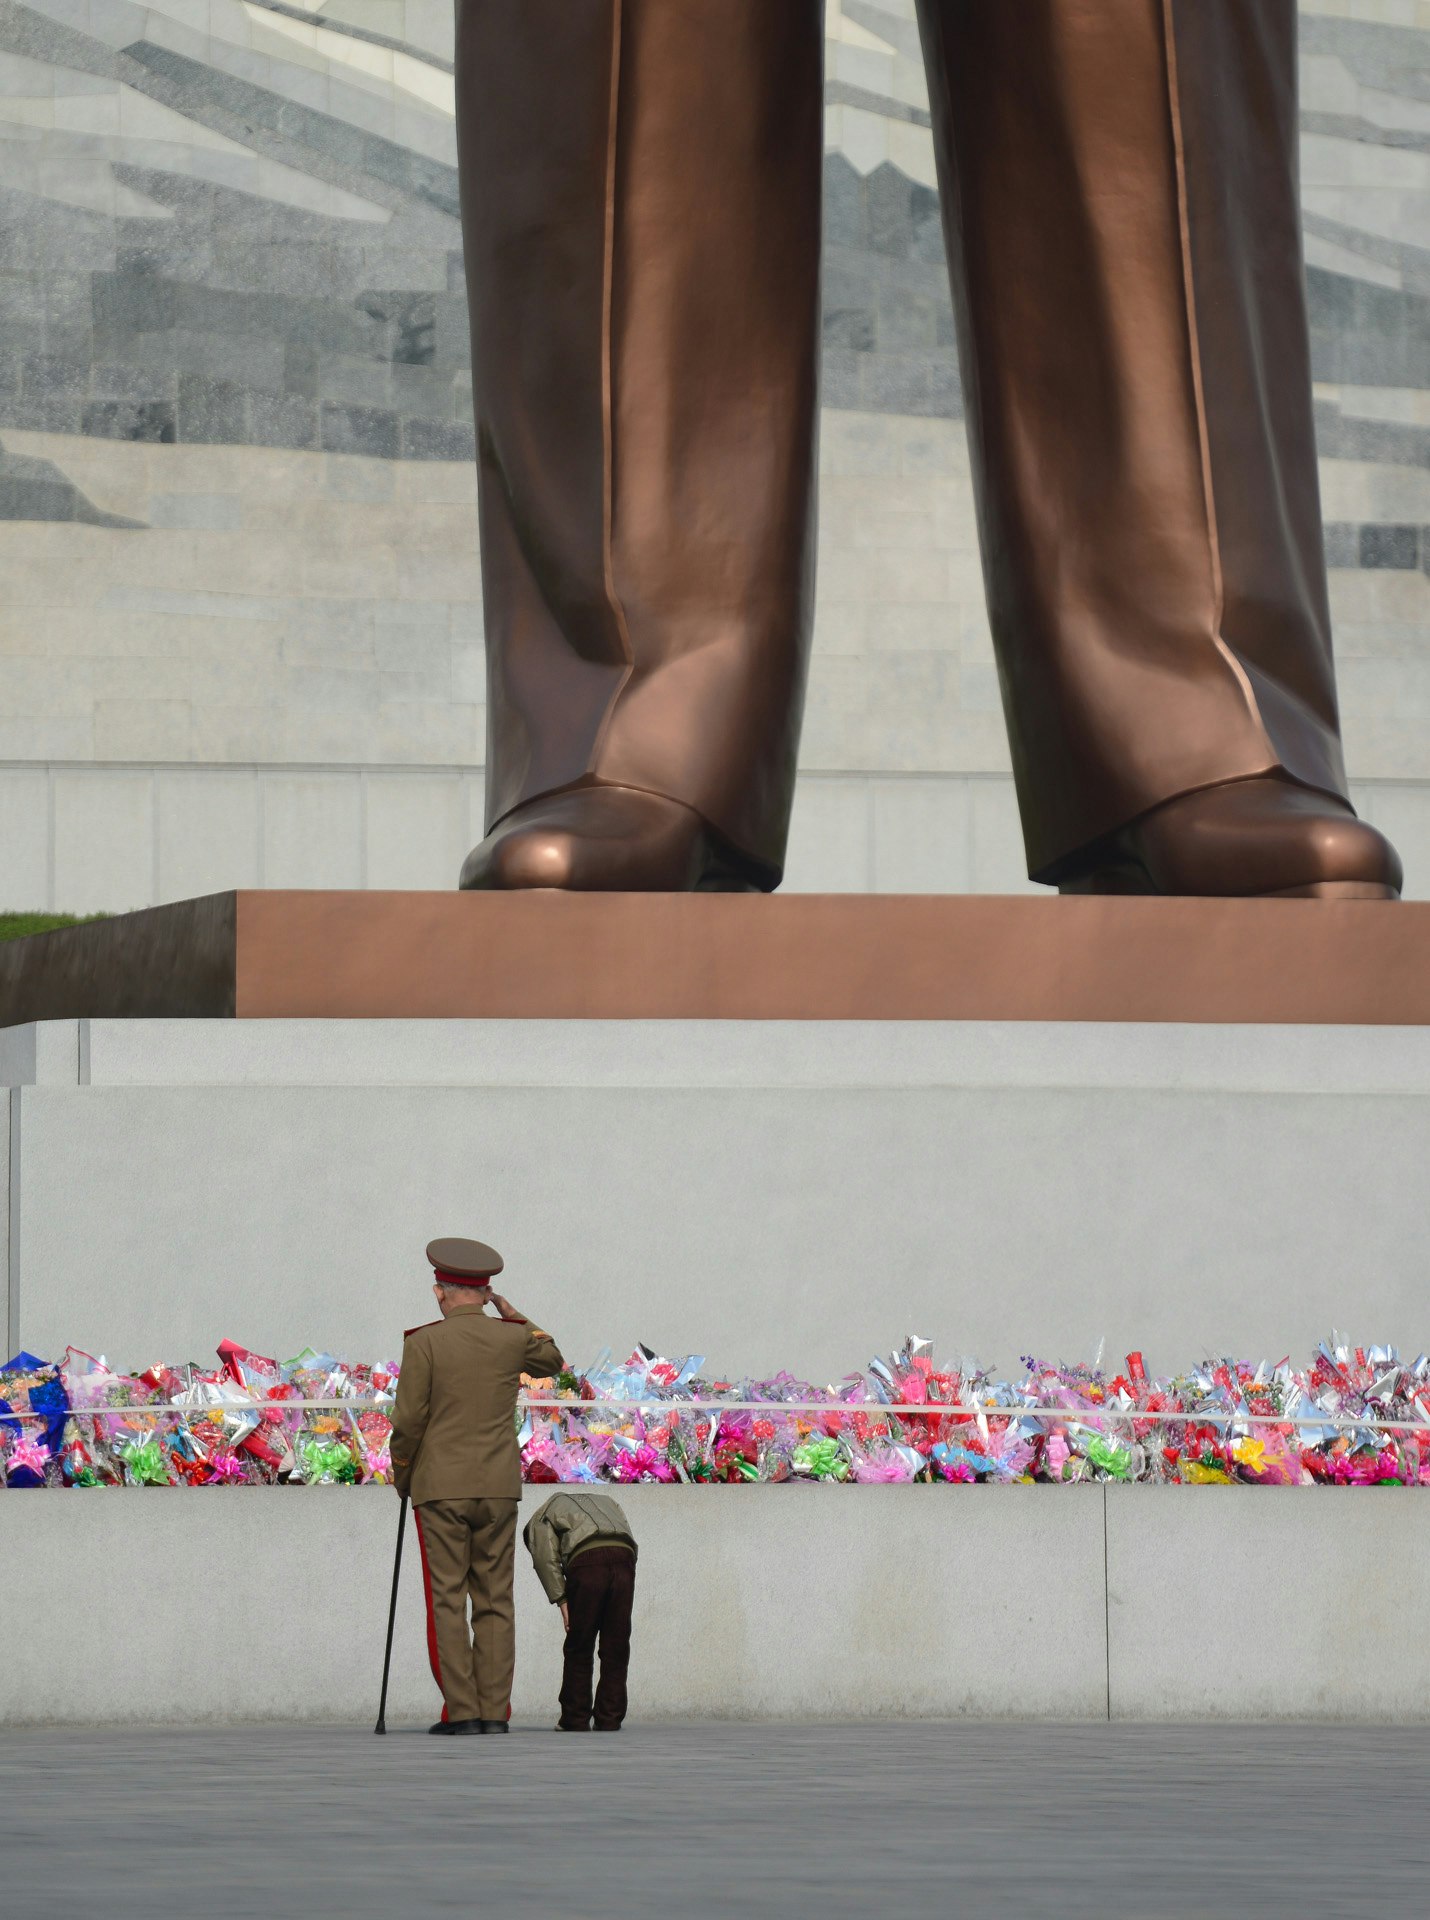 North Korea is captured in a series of photographs.